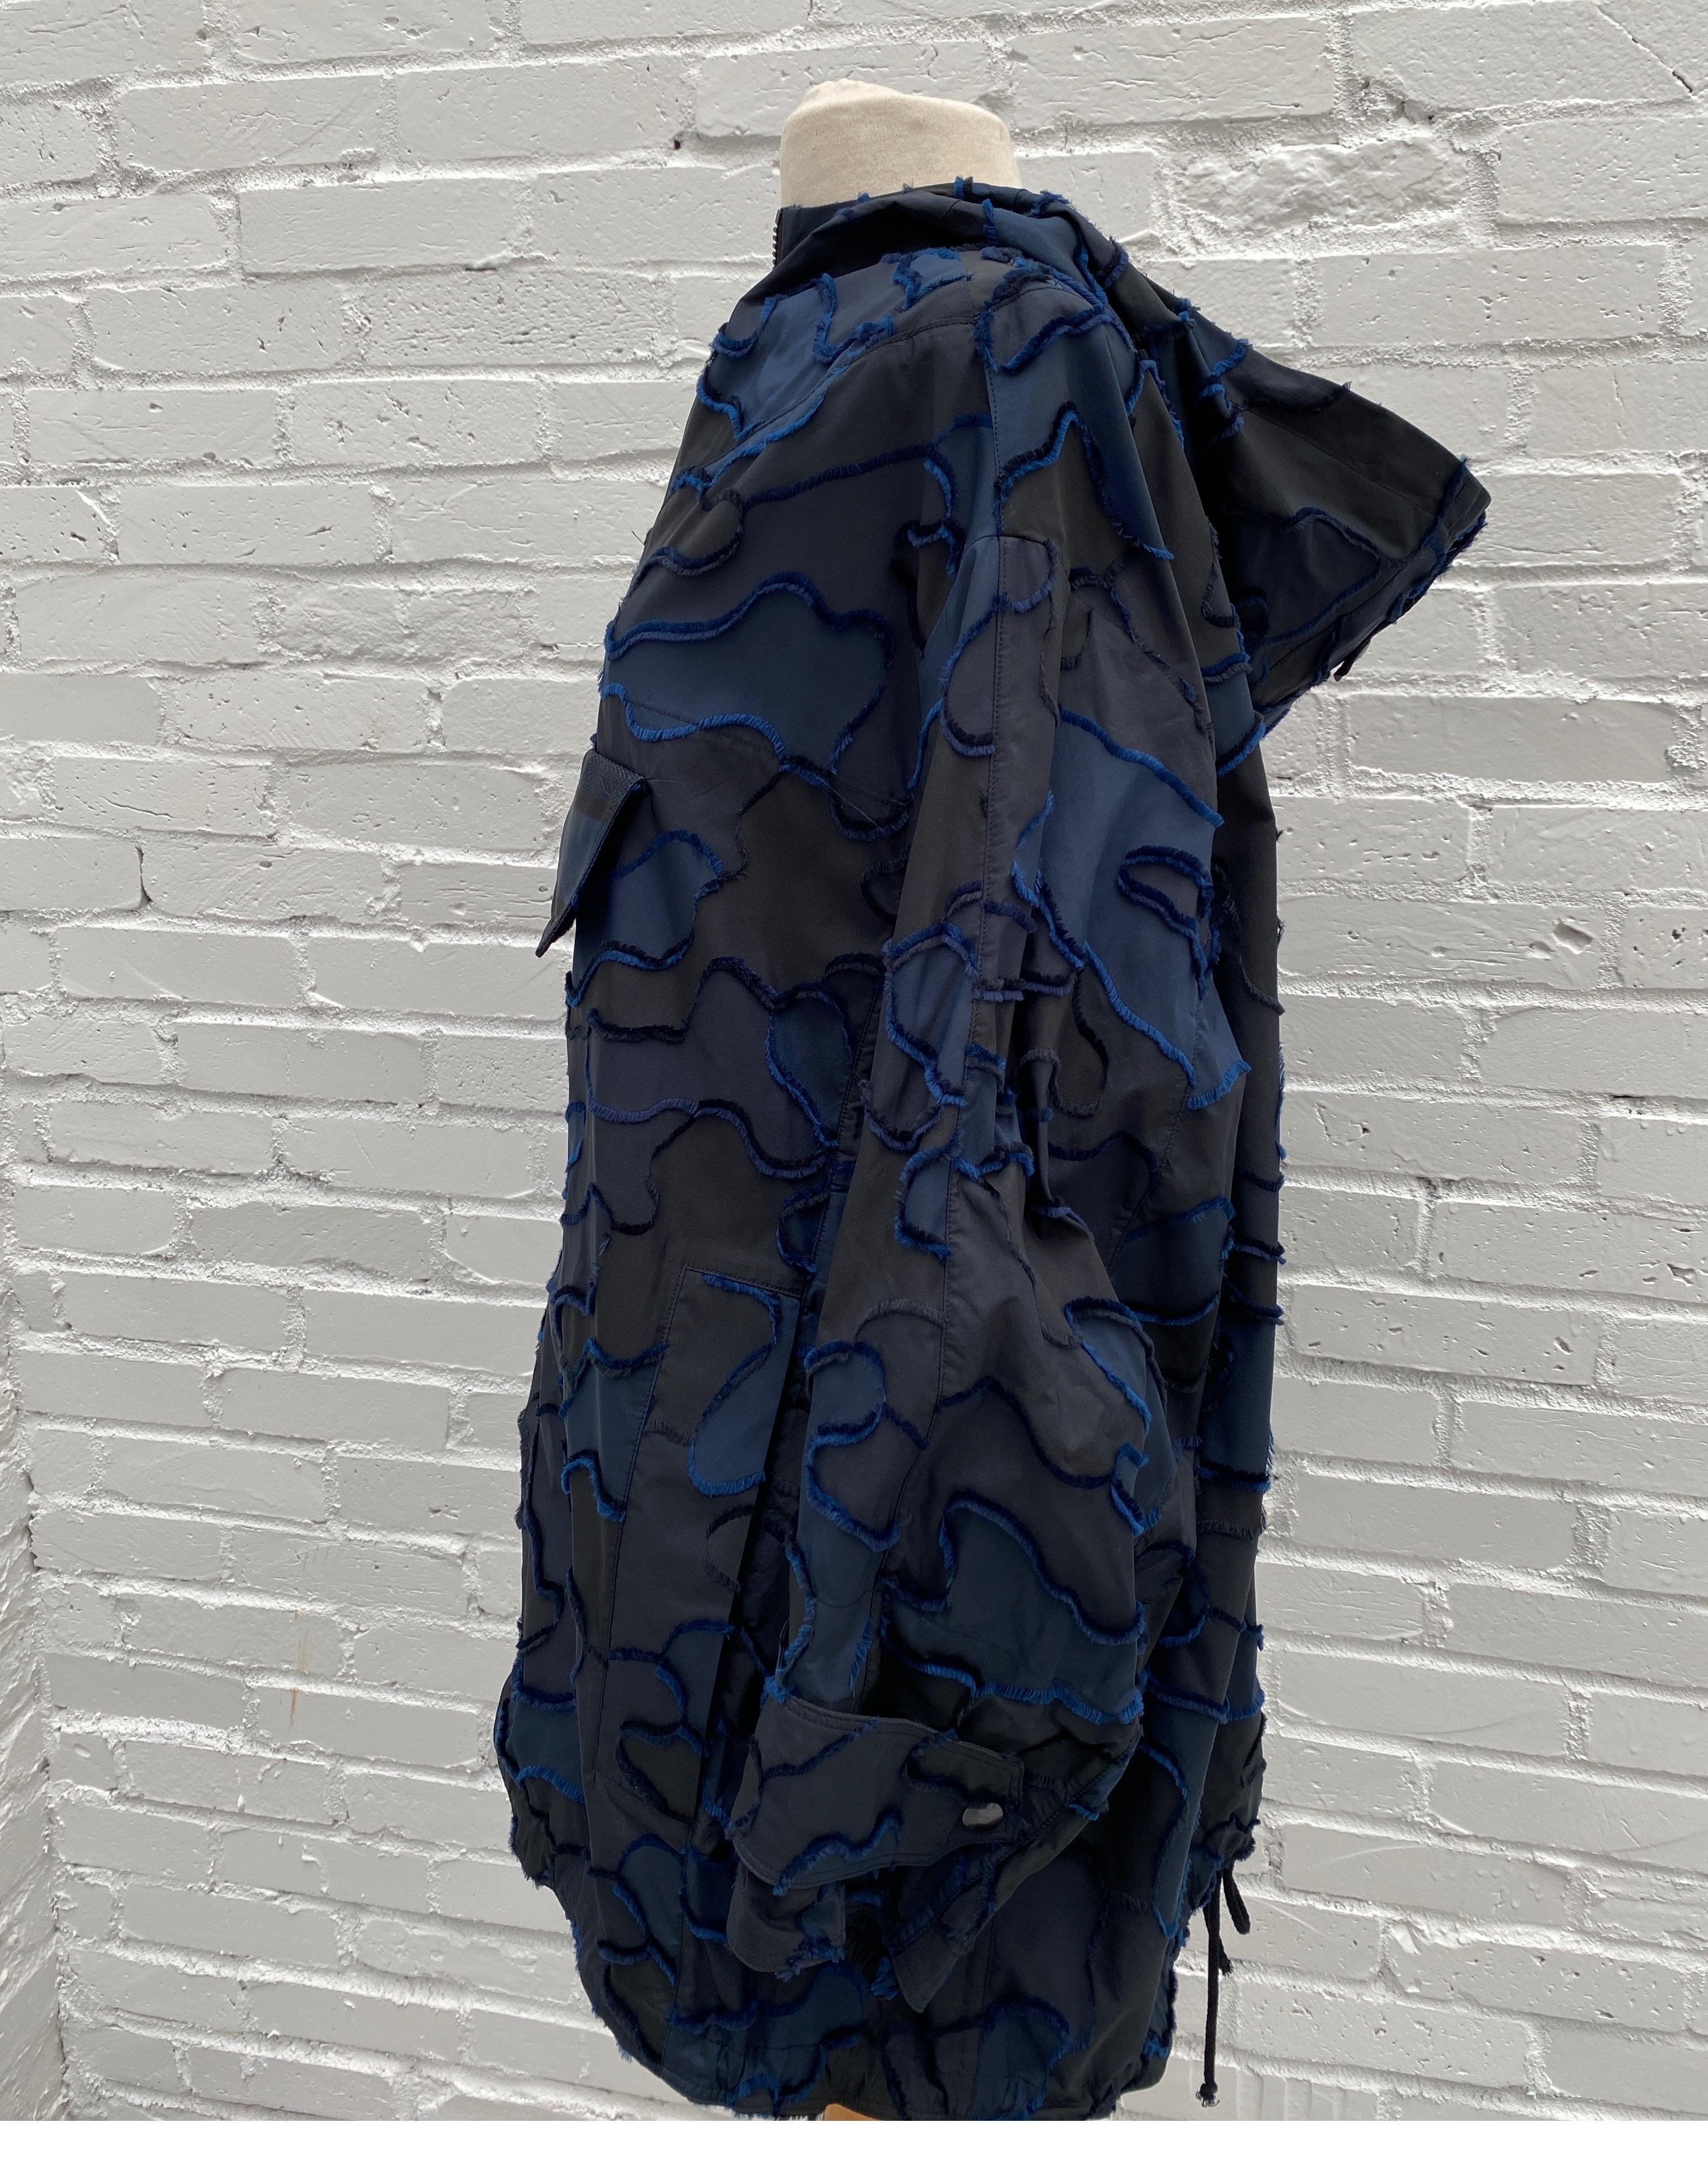 Christian Dior Anorak Navy Windbreaker. XS size is oversized. Fits size 2-8. Great looking light jacket with Logo. Sold out at Dior. Rare and limited. Retail $3600 plus tax. Brand new condition. Guaranteed authentic. 